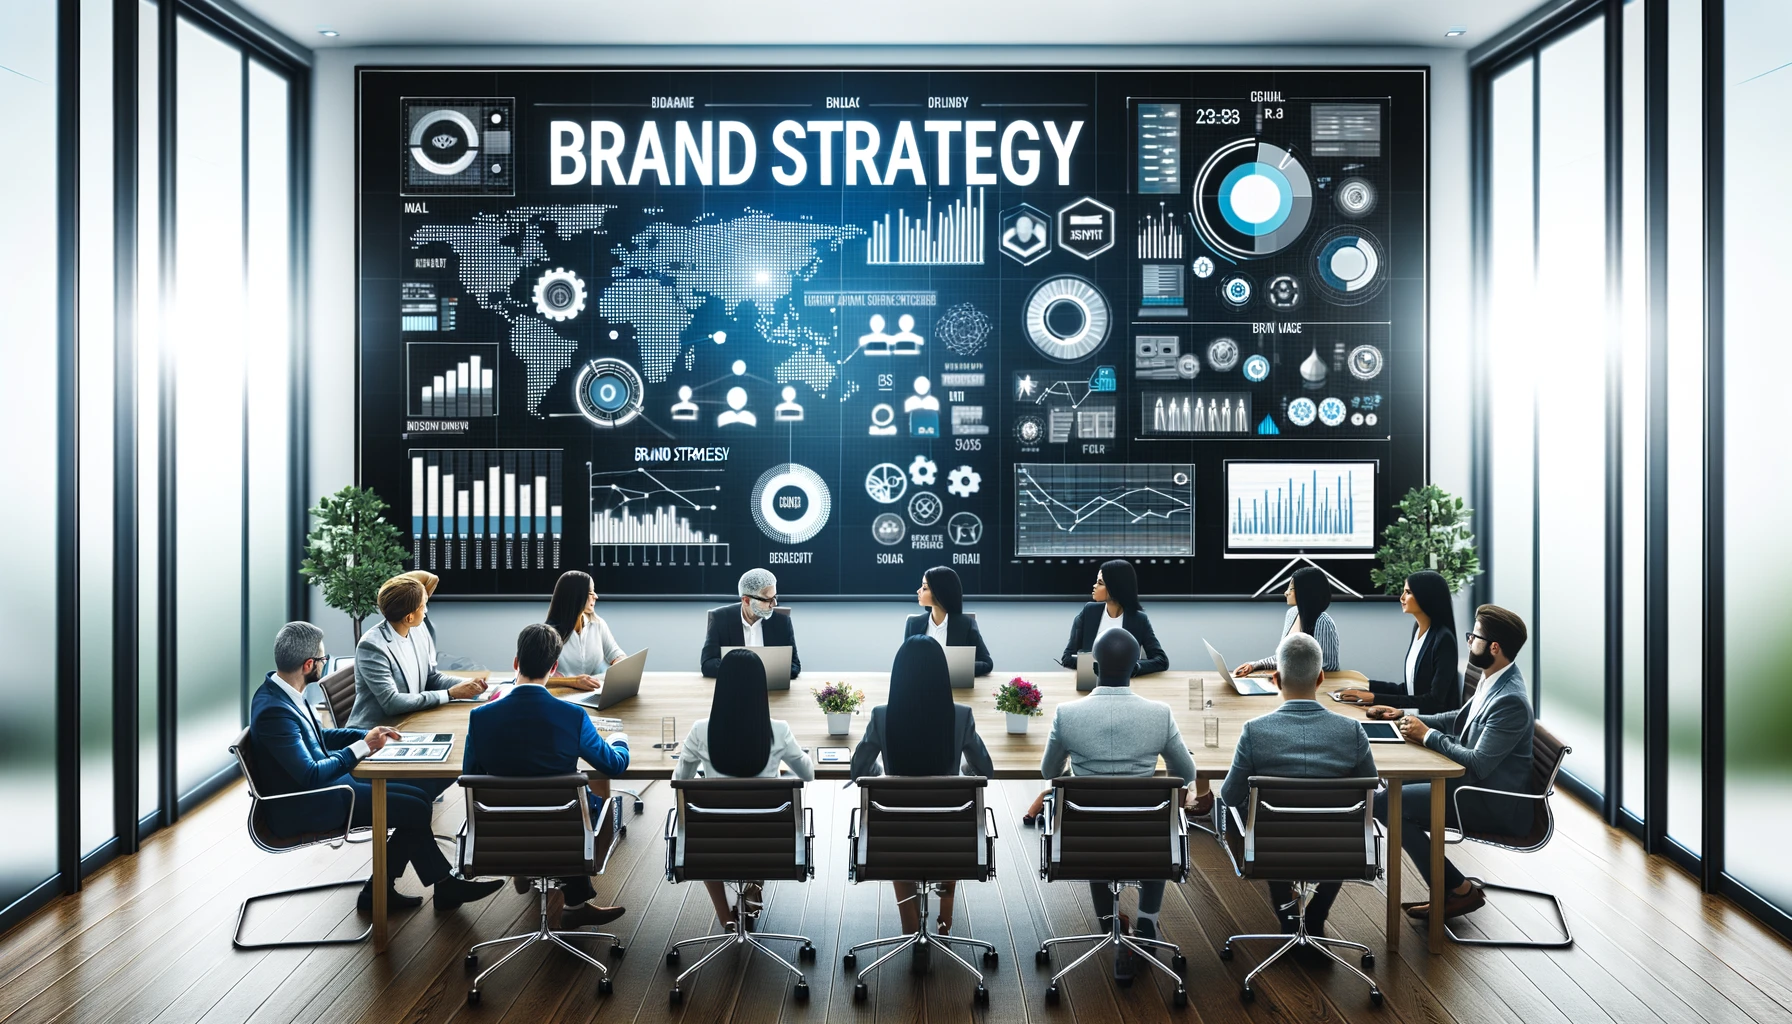 Coherent Brand Strategy in the Digital Age